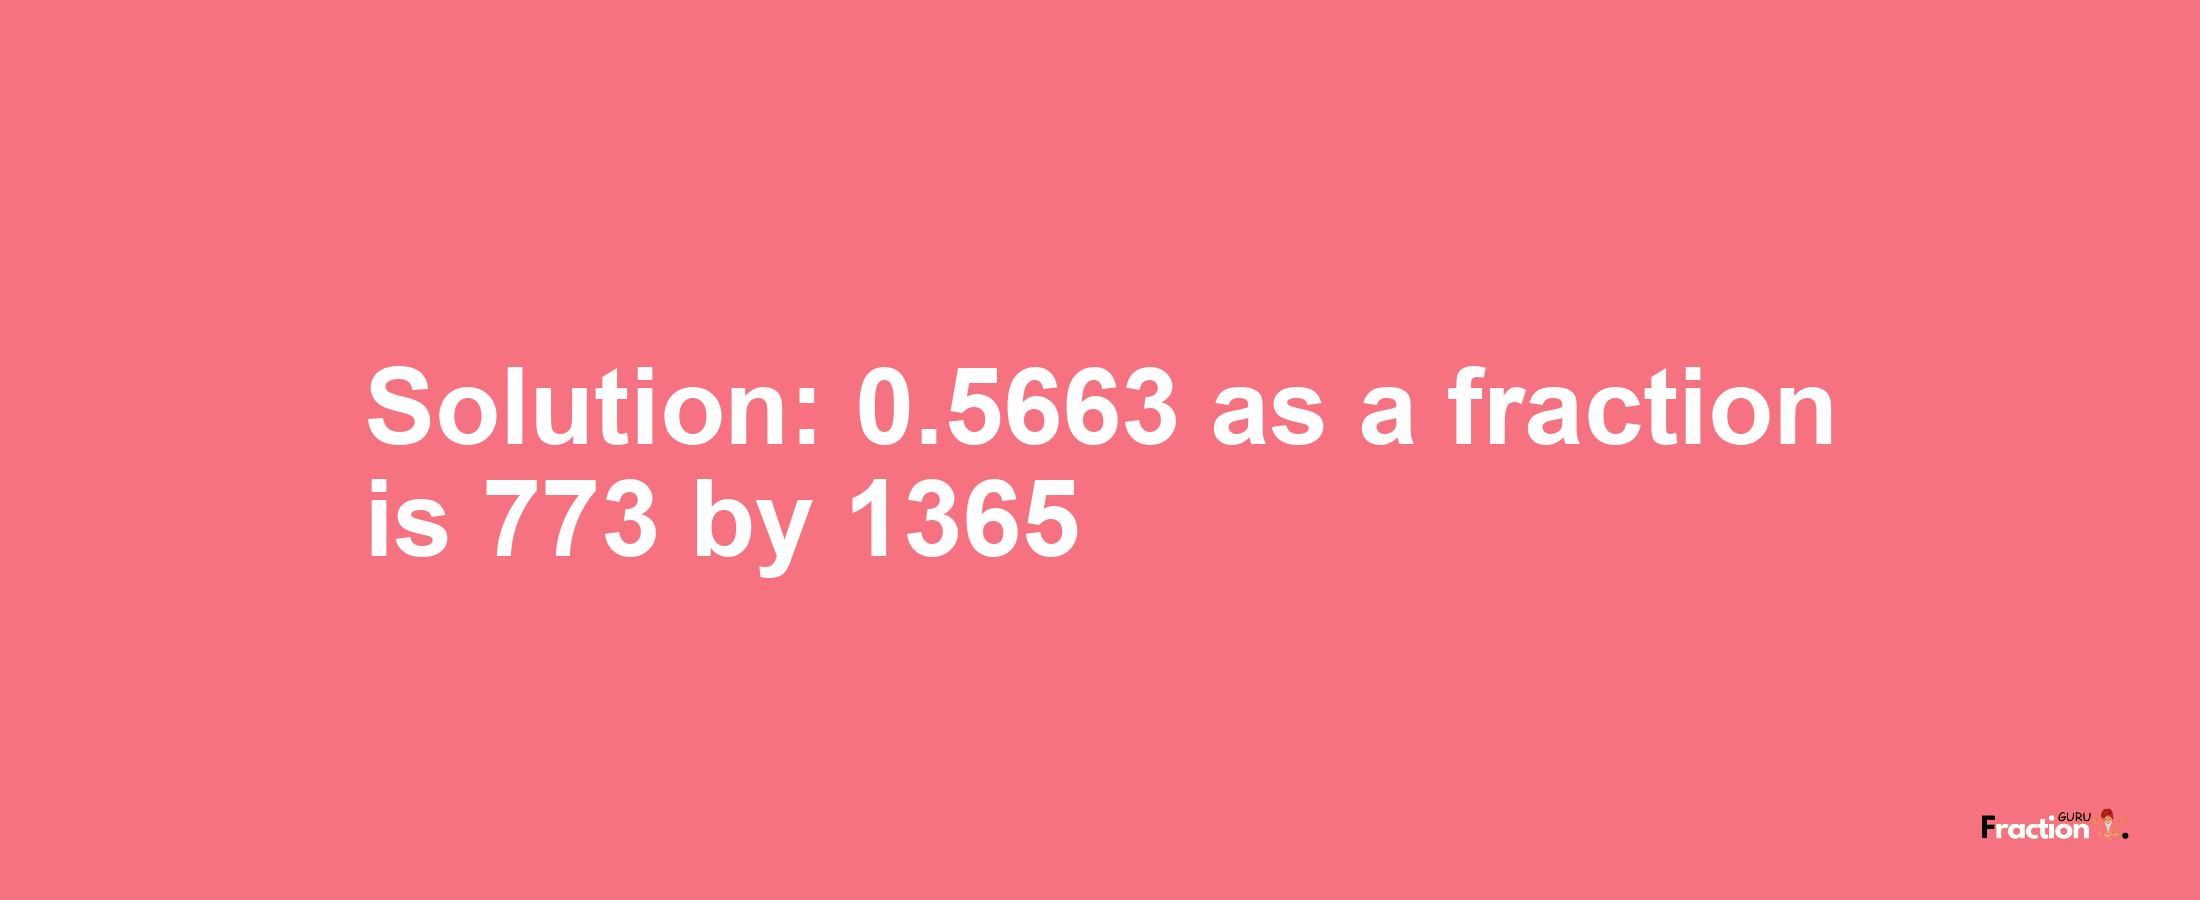 Solution:0.5663 as a fraction is 773/1365